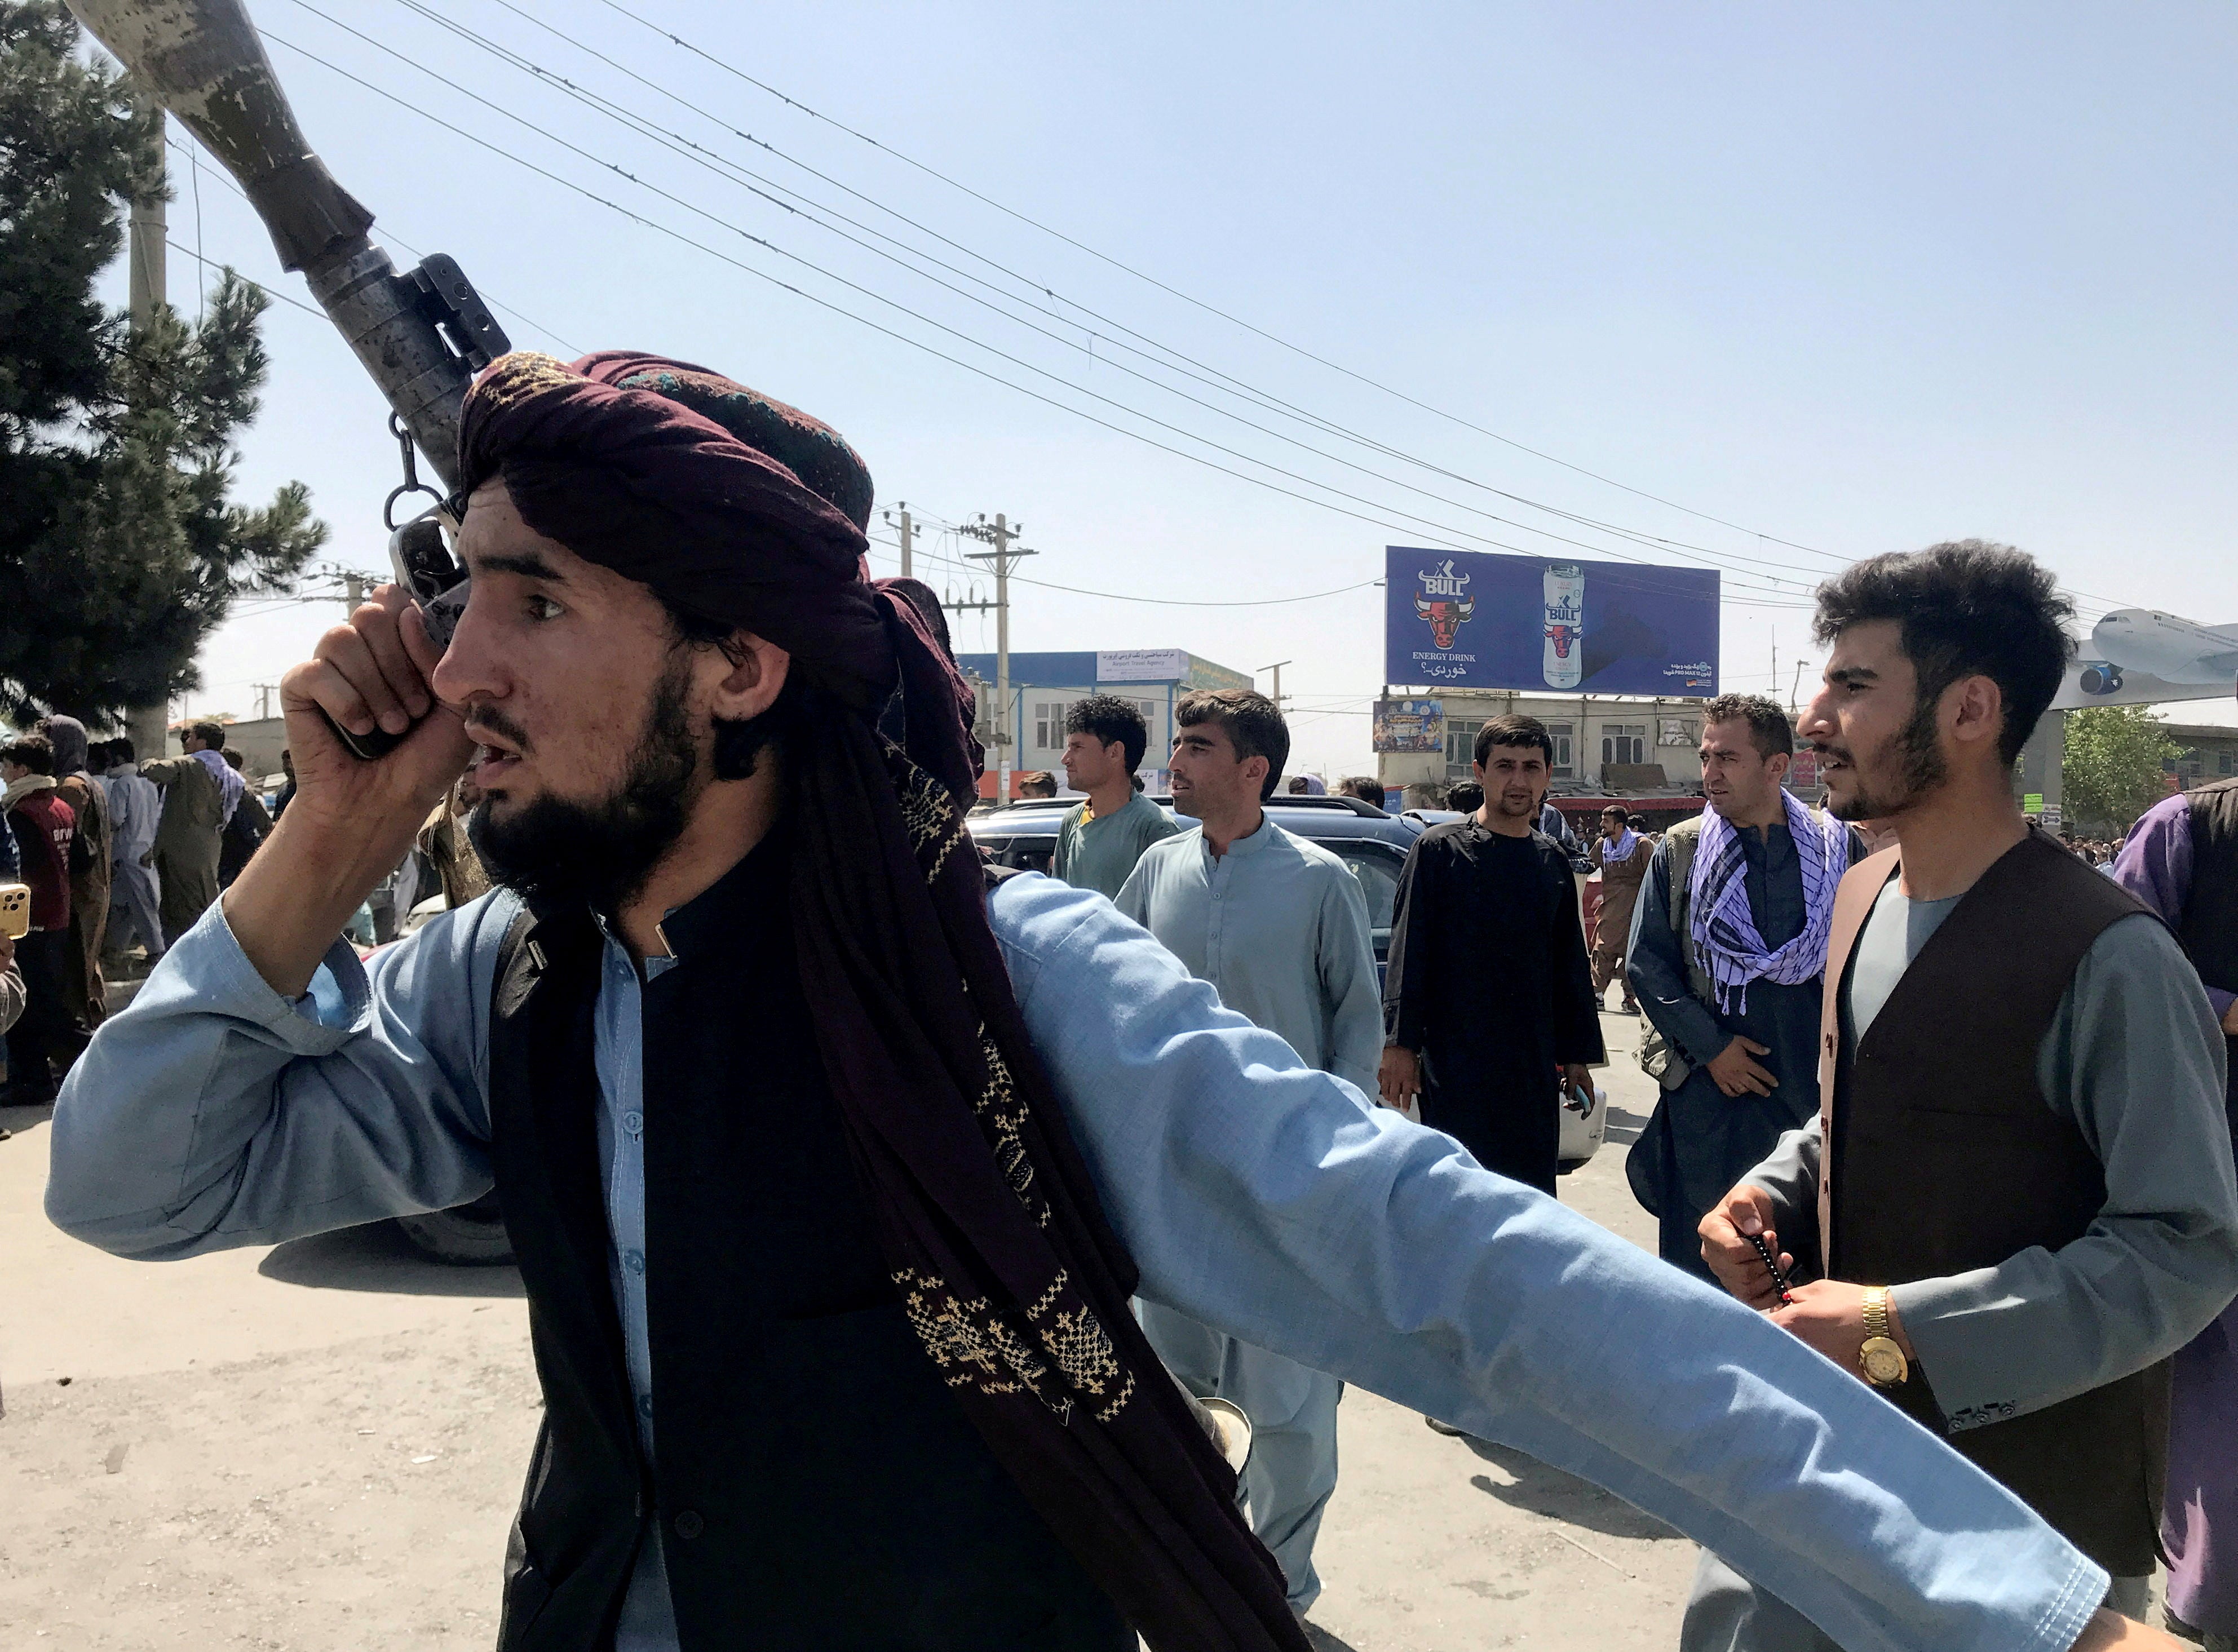 A member of Taliban forces inspects the area outside Hamid Karzai International Airport